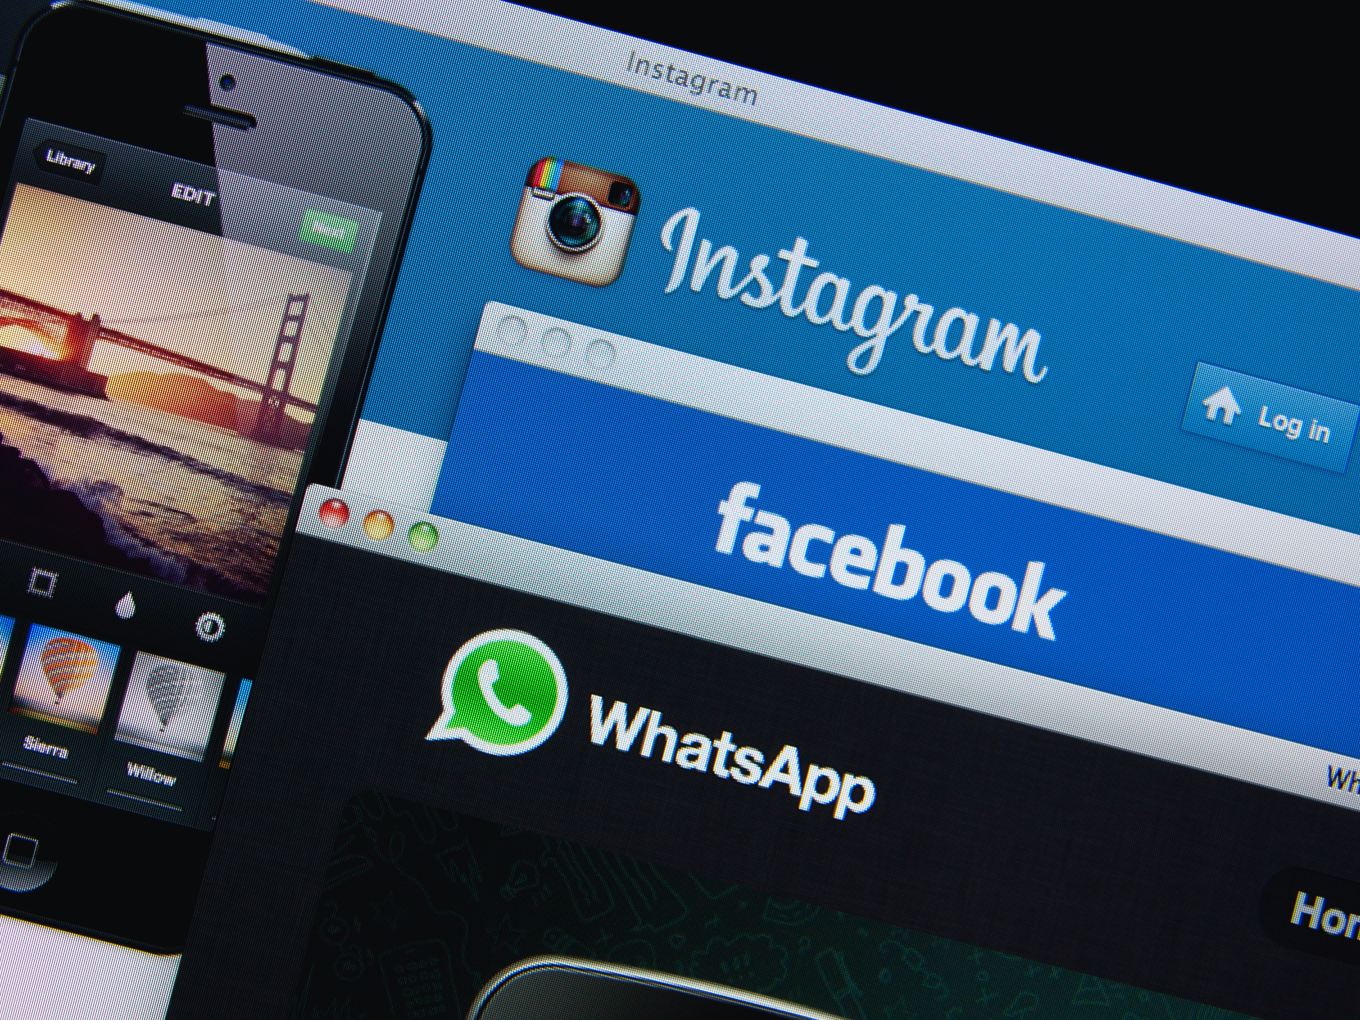 whatsapp facebook data sharing privacy policy